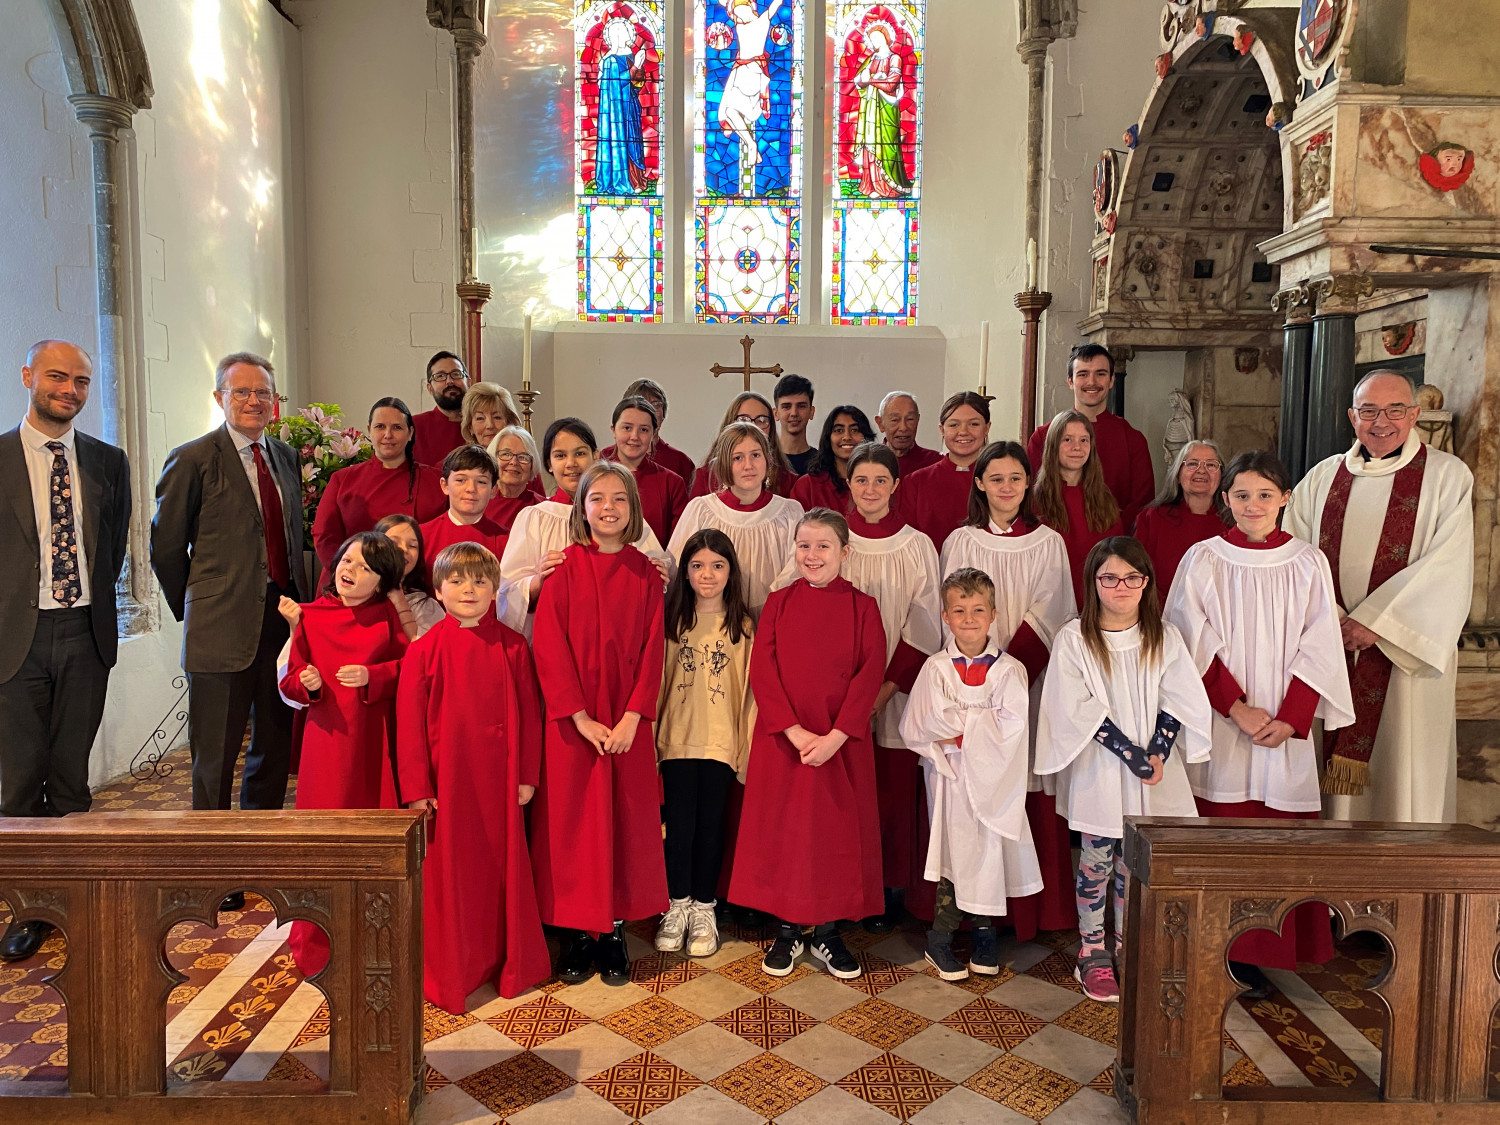 A mixed choir of robed children, young people, and grown-ups stand beneath a stained glass window in the the church and smile.